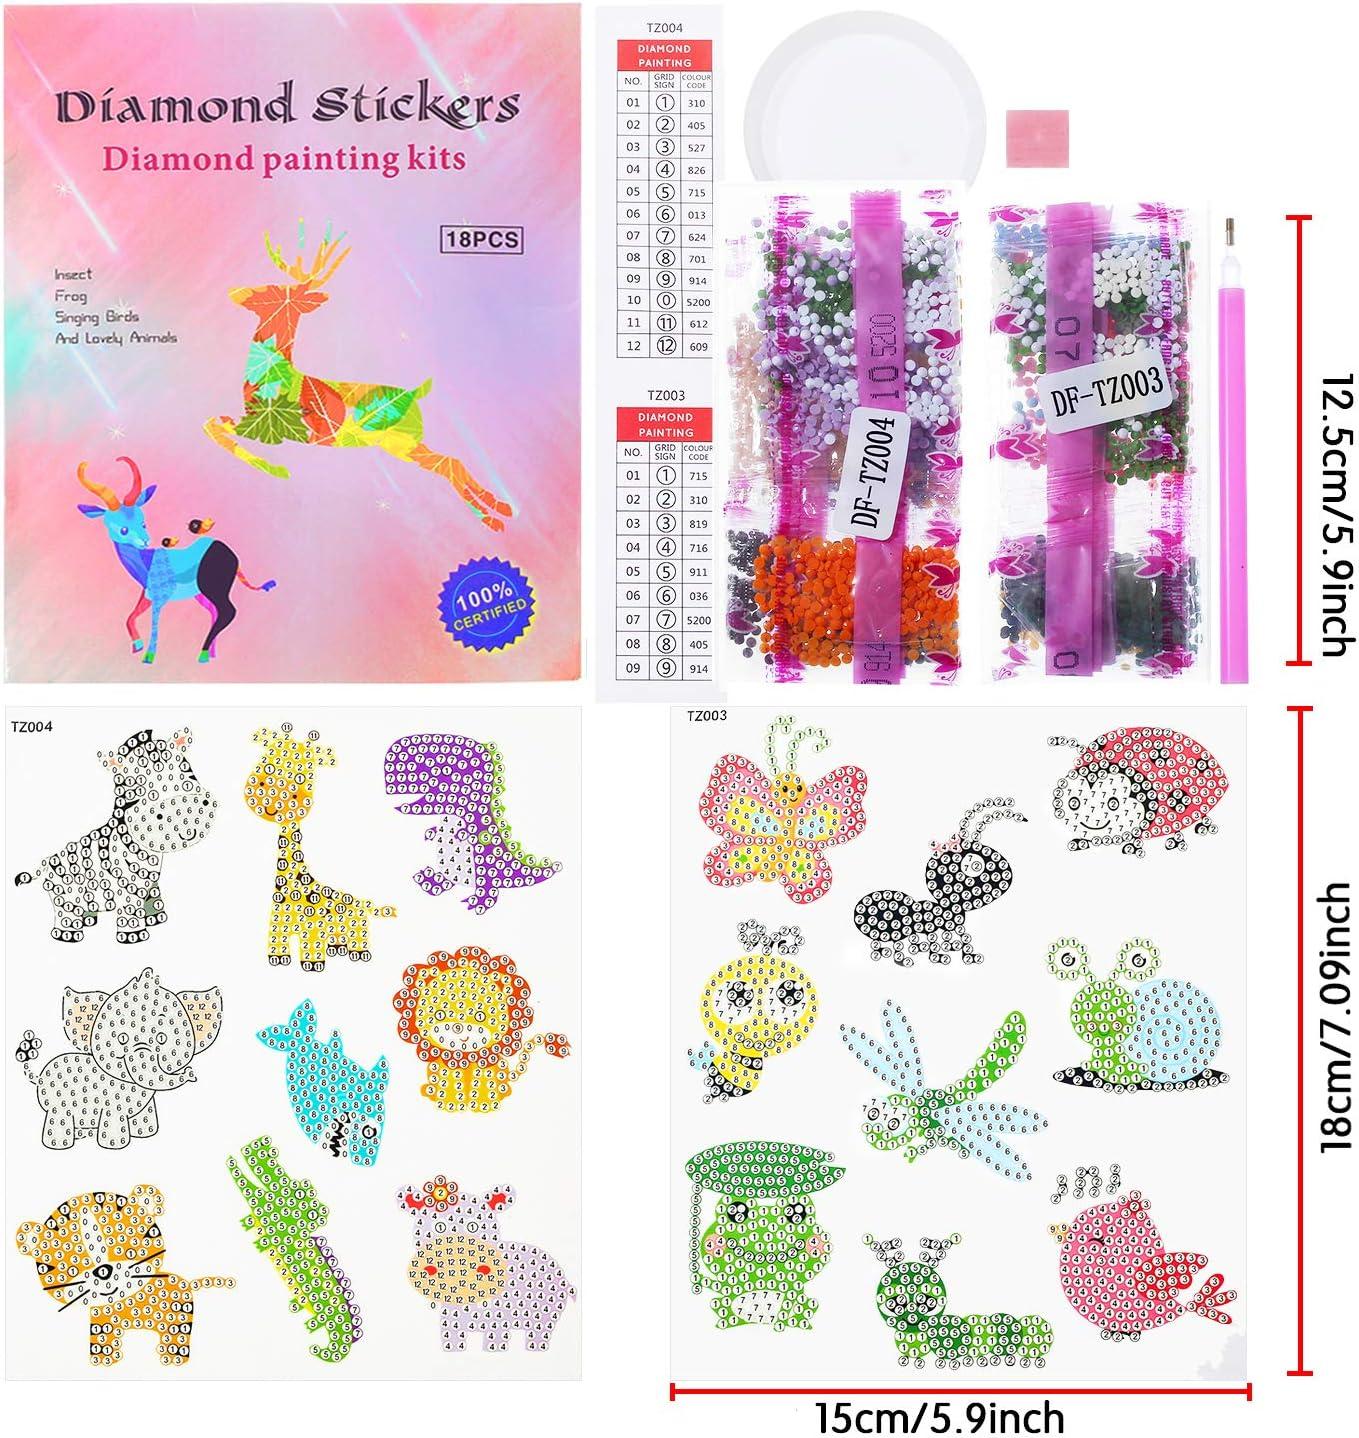 sinceroduct 5D Diamond Painting Stickers Kits for Kids Arts and Crafts,  Cartoon Stickers Stick Paint with Diamonds by Numbers, 18Pcs Cute Insect